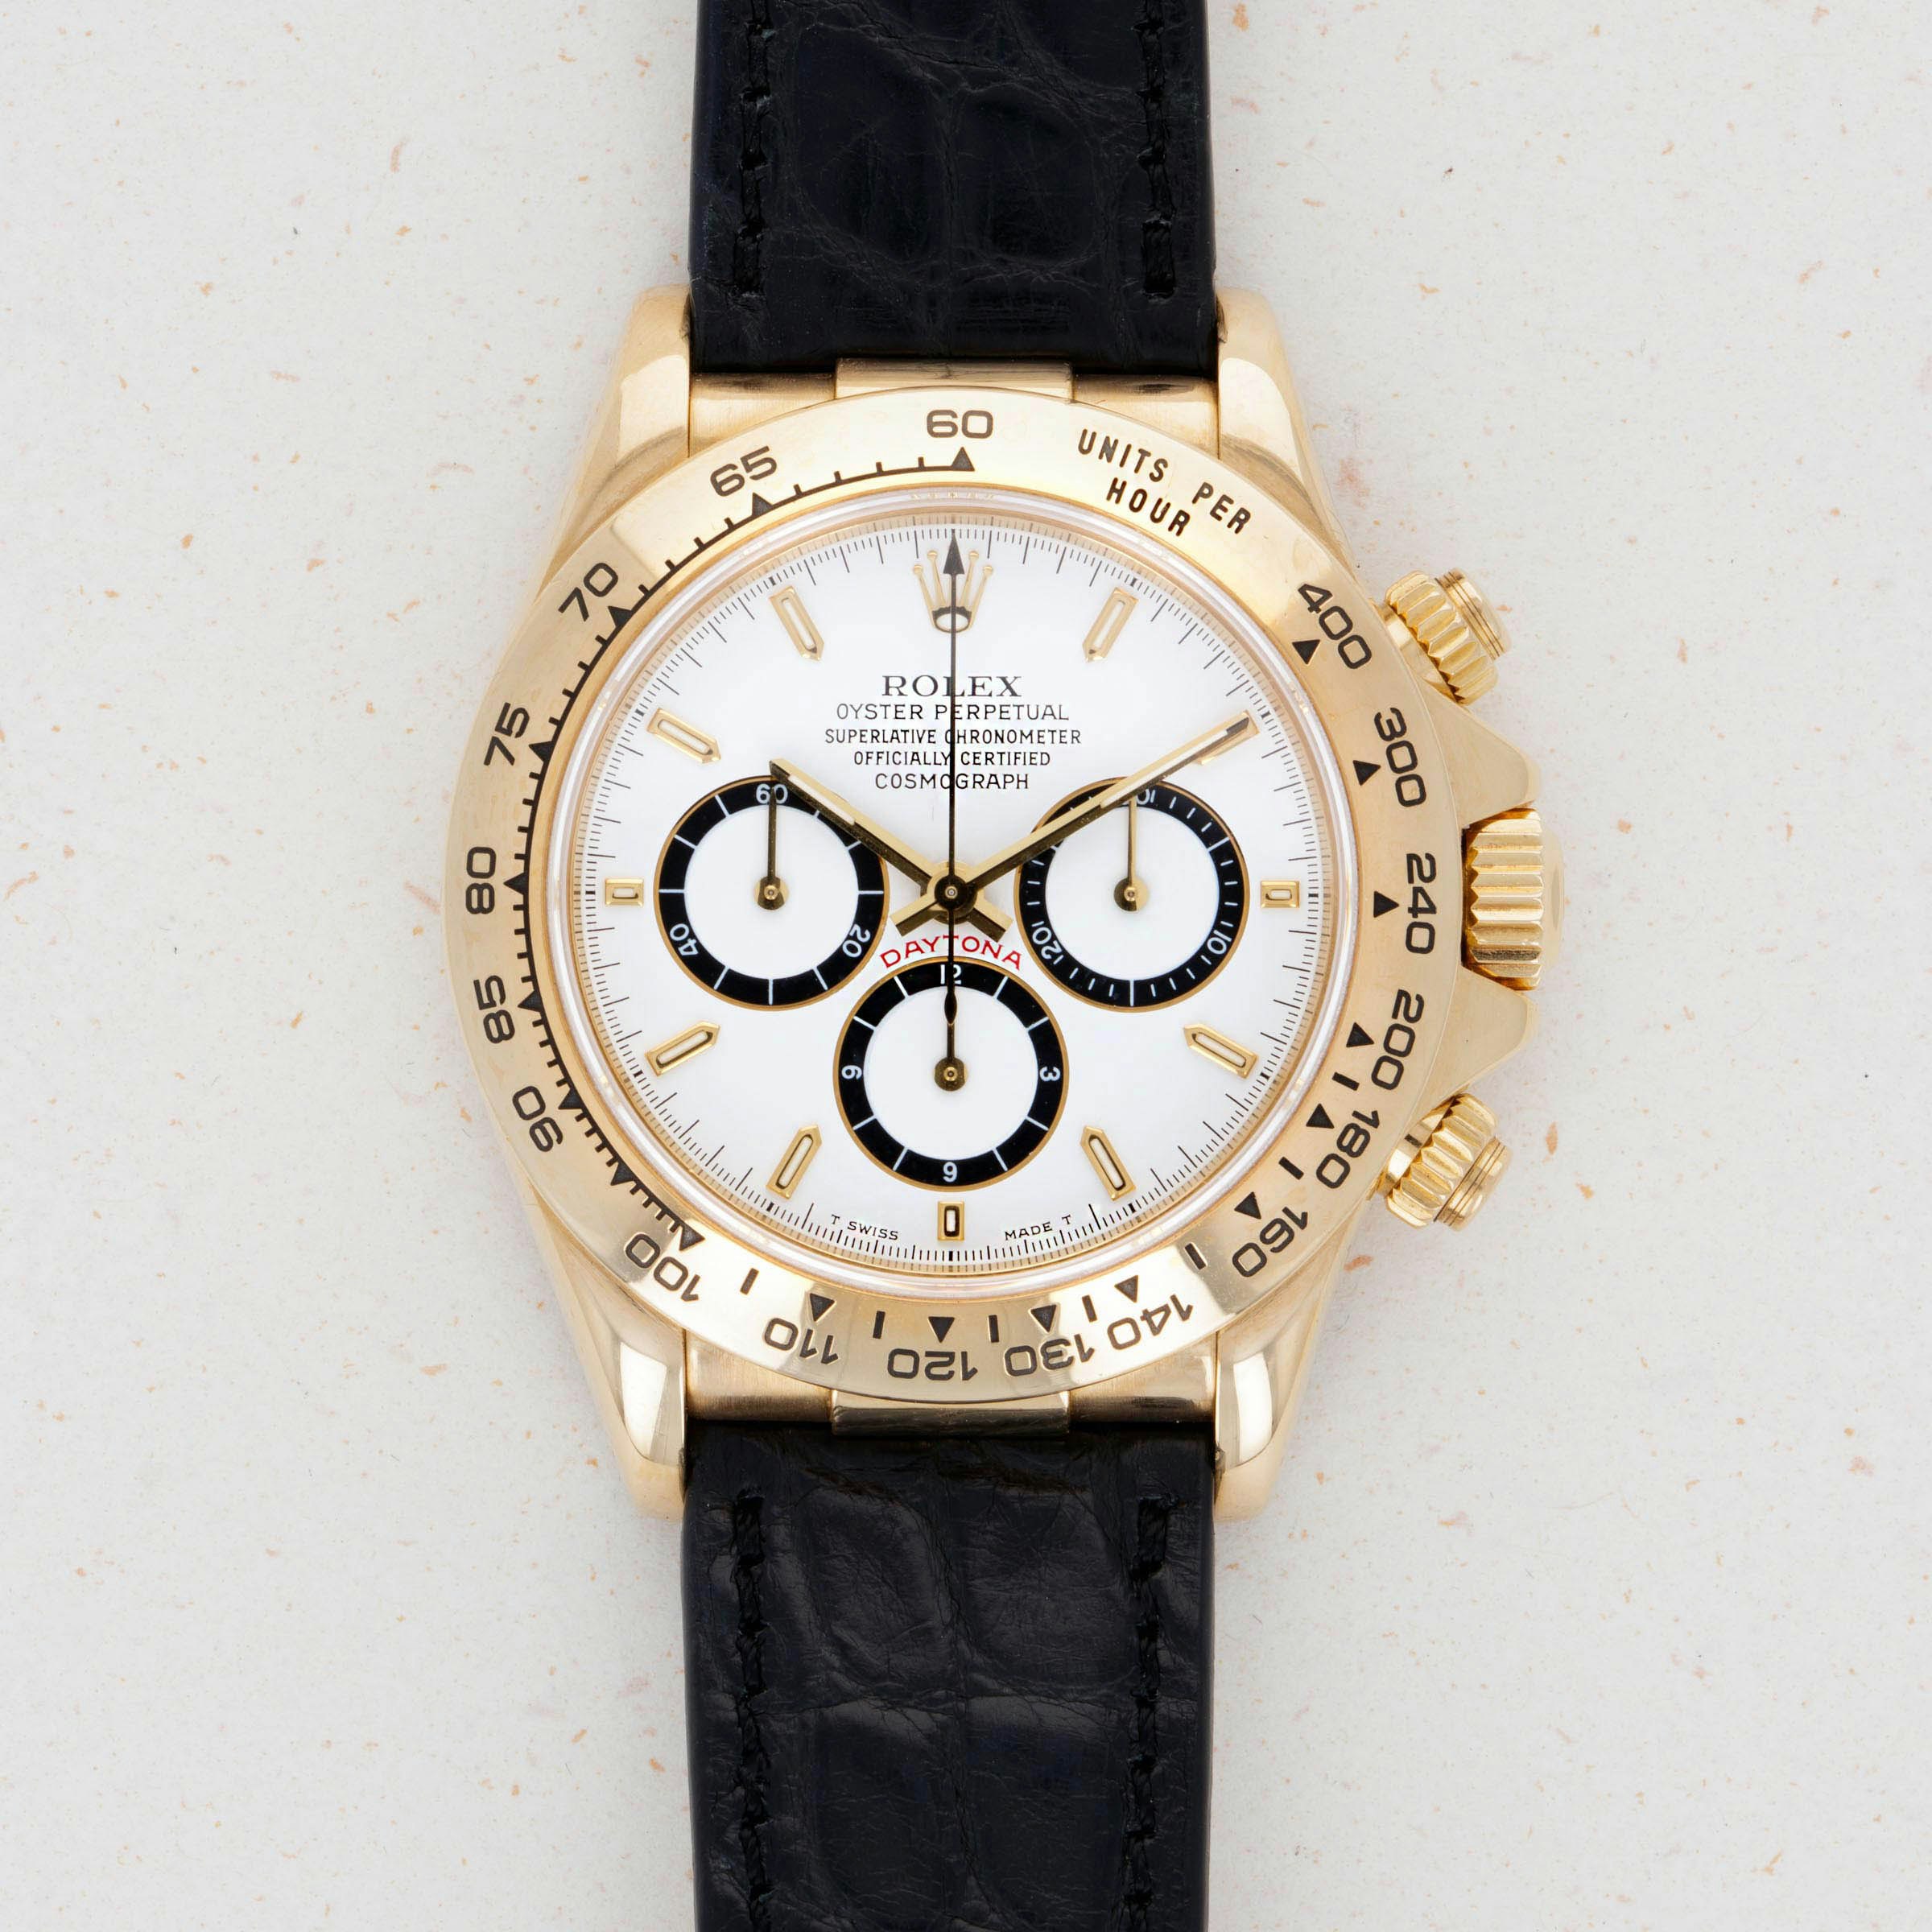 Thumbnail for Rolex Daytona Yellow Gold Zenith Movement 16518 Box and Papers